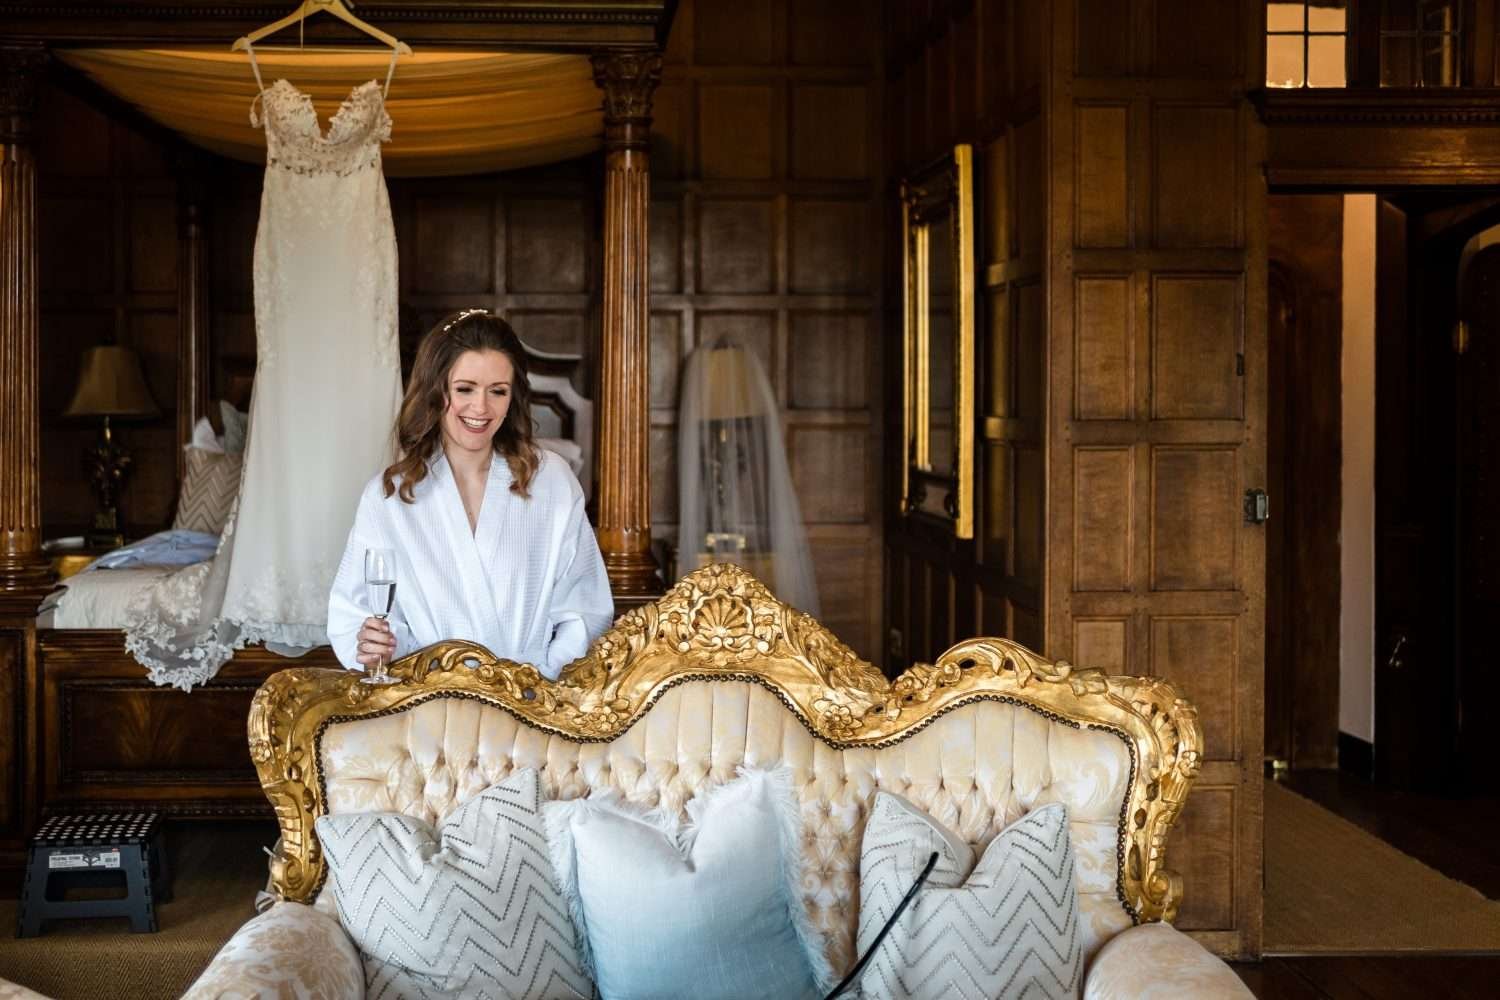 A bride is getting ready for her wedding but she is still in her dressing gown and drinking wine while wearing her tiara! She is standing behind a richly decorated sofa in a wood panelled elizabethan room and her wedding dress is hanging from a four poster bed behind her. 